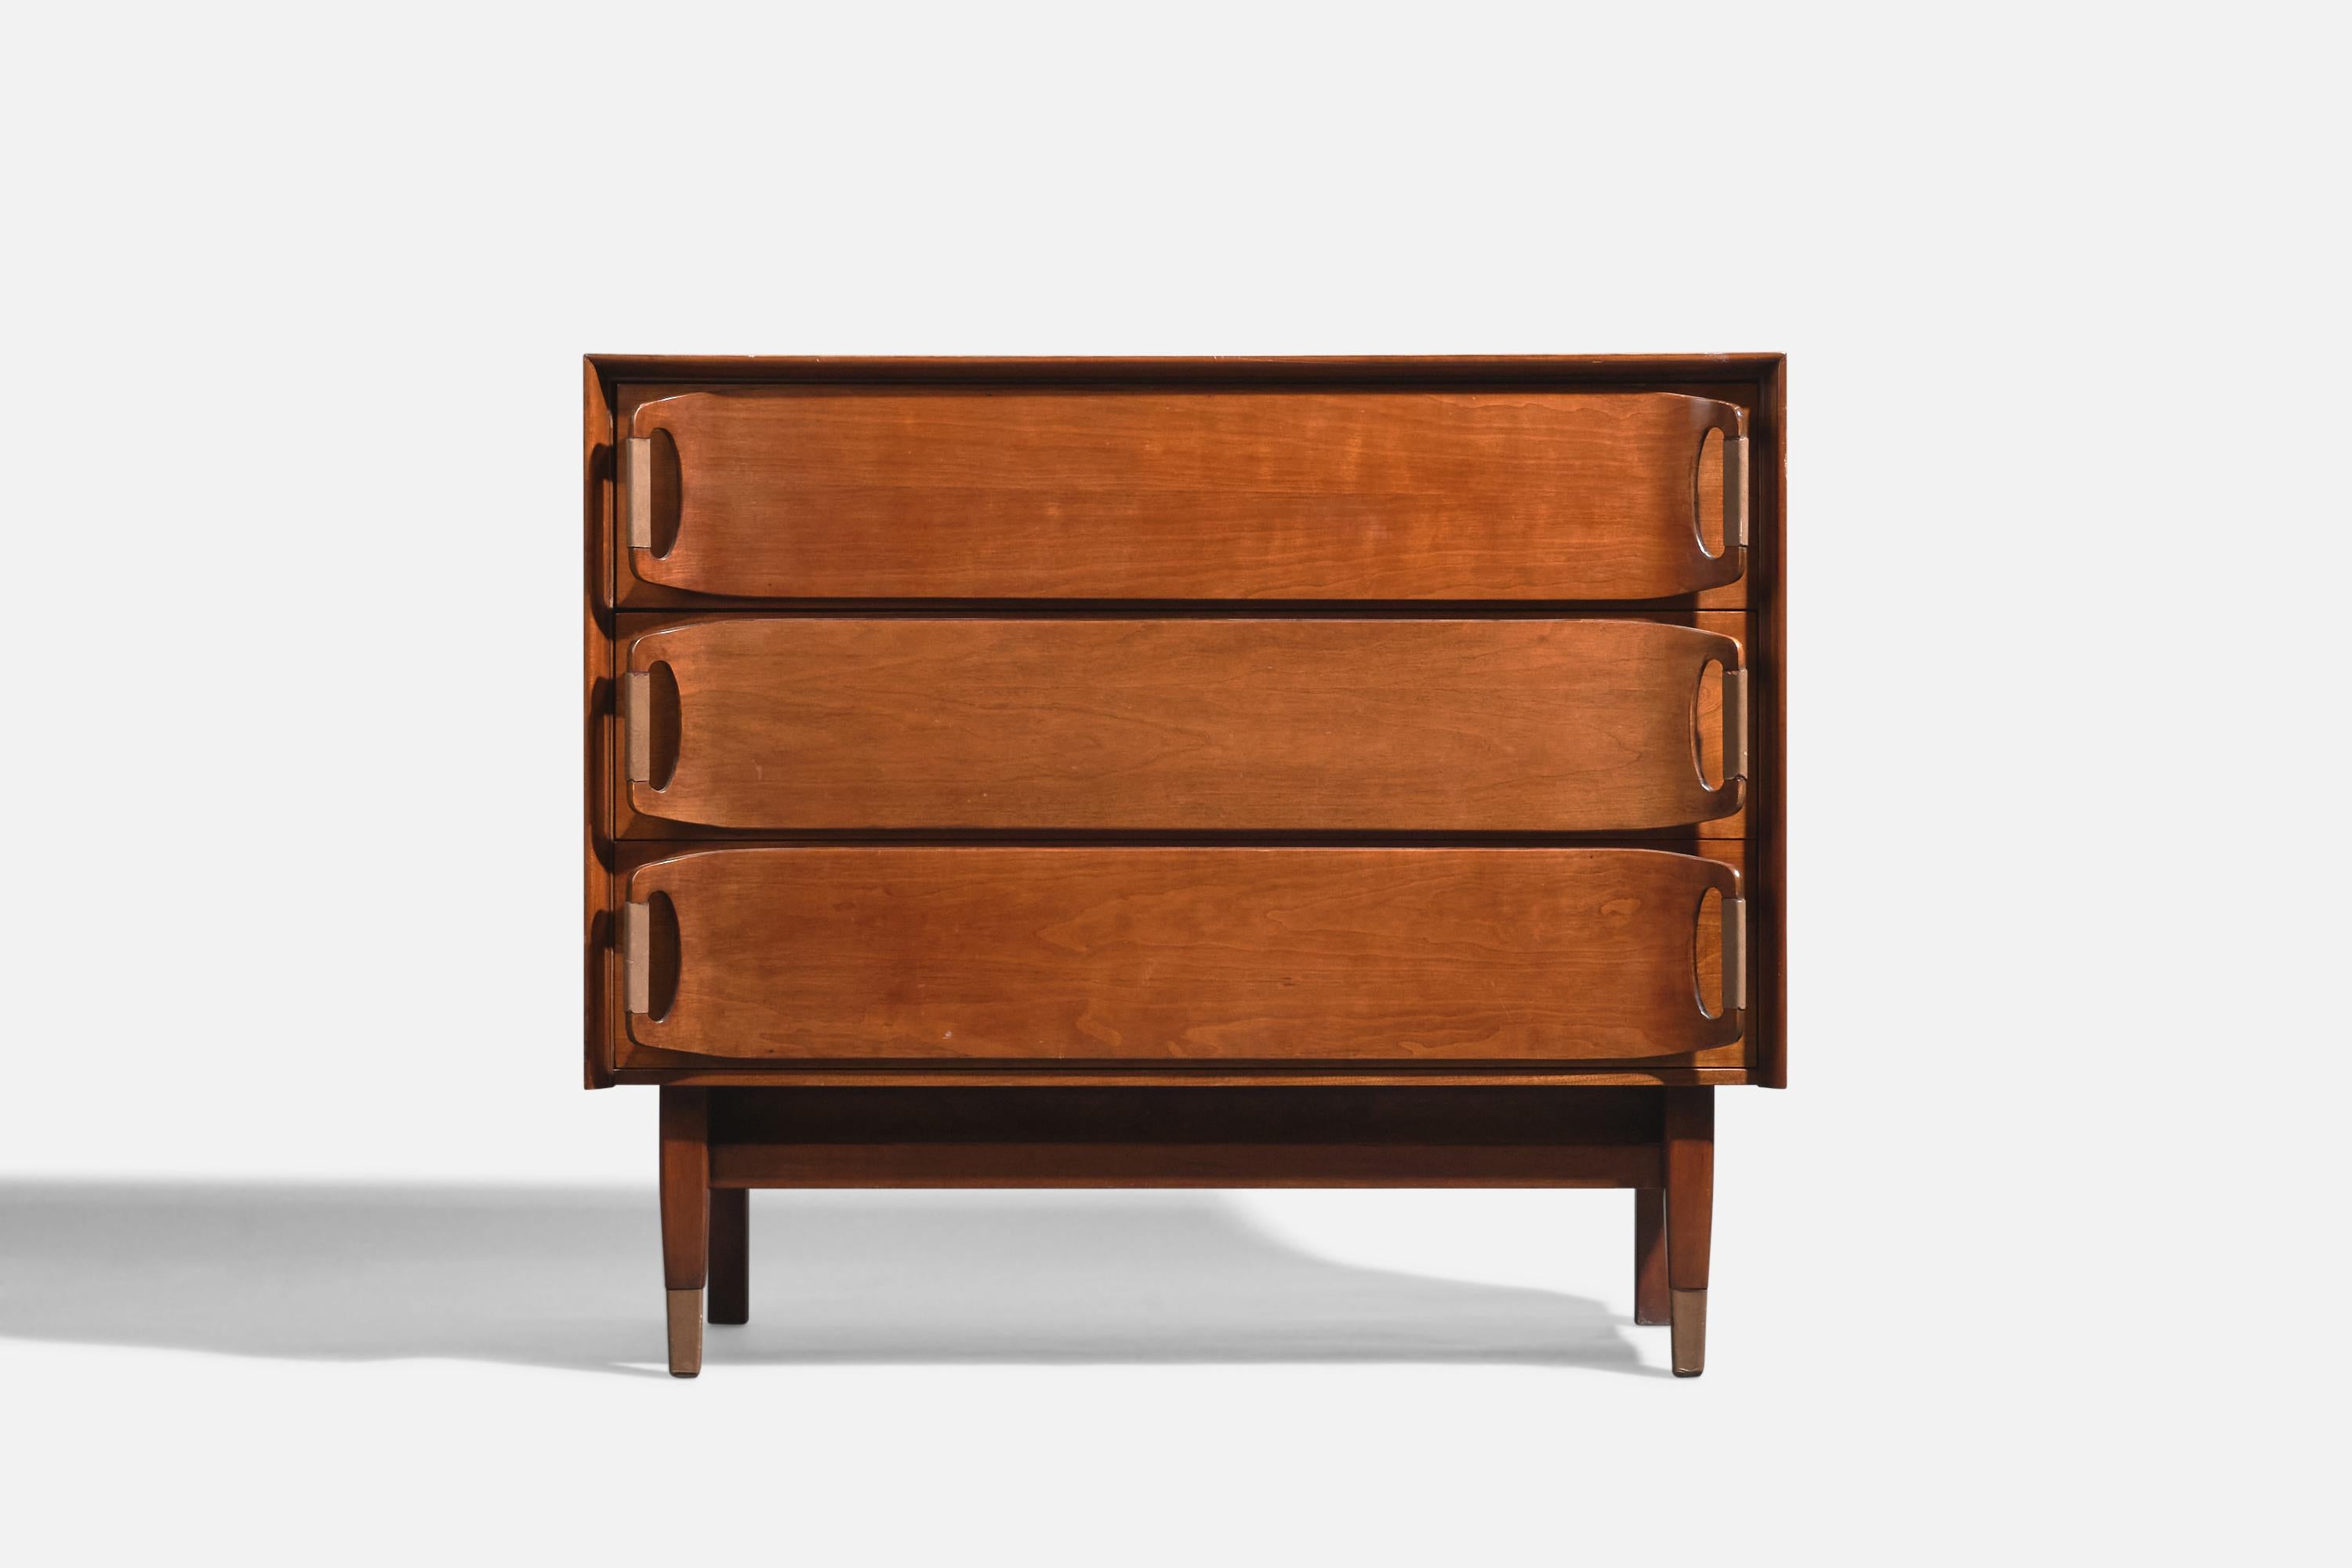 A pair of walnut, leather and brass dressers designed and produced by Ramseur Furniture Company, USA, 1970s.